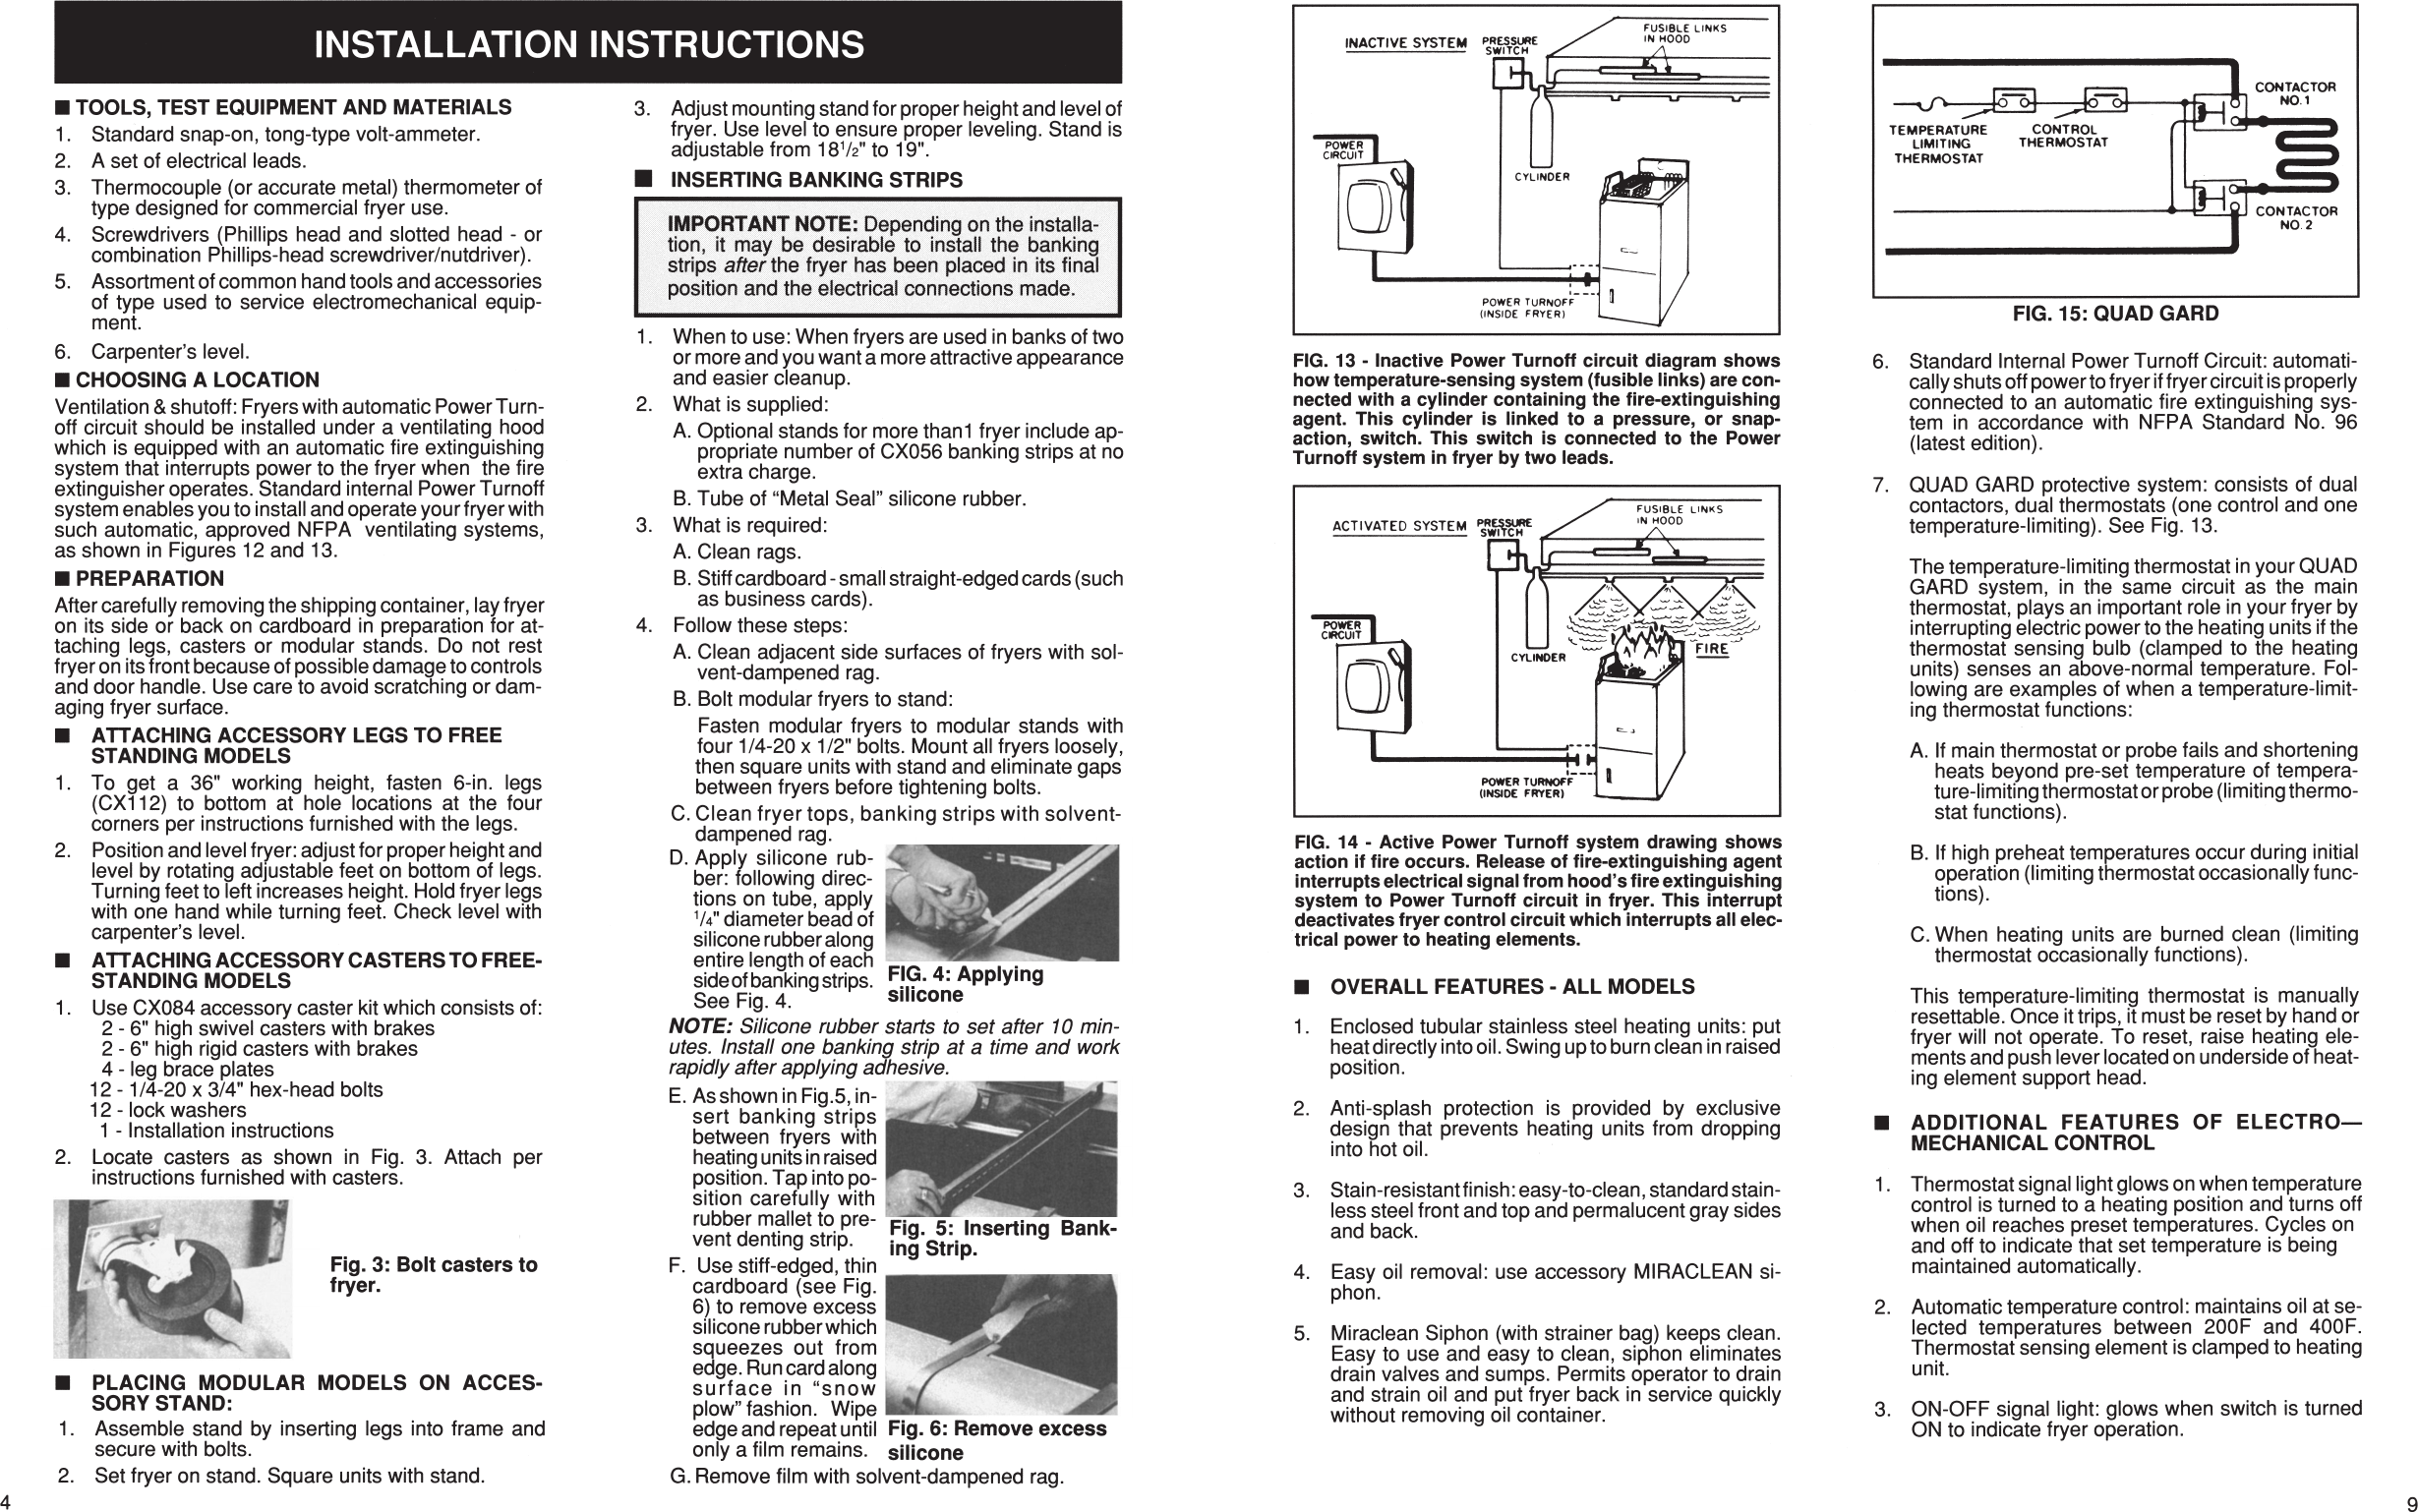 Page 9 of 12 - Hobart Hobart-Corp-Fryer-Ck40-Users-Manual- F27400  Hobart-corp-fryer-ck40-users-manual